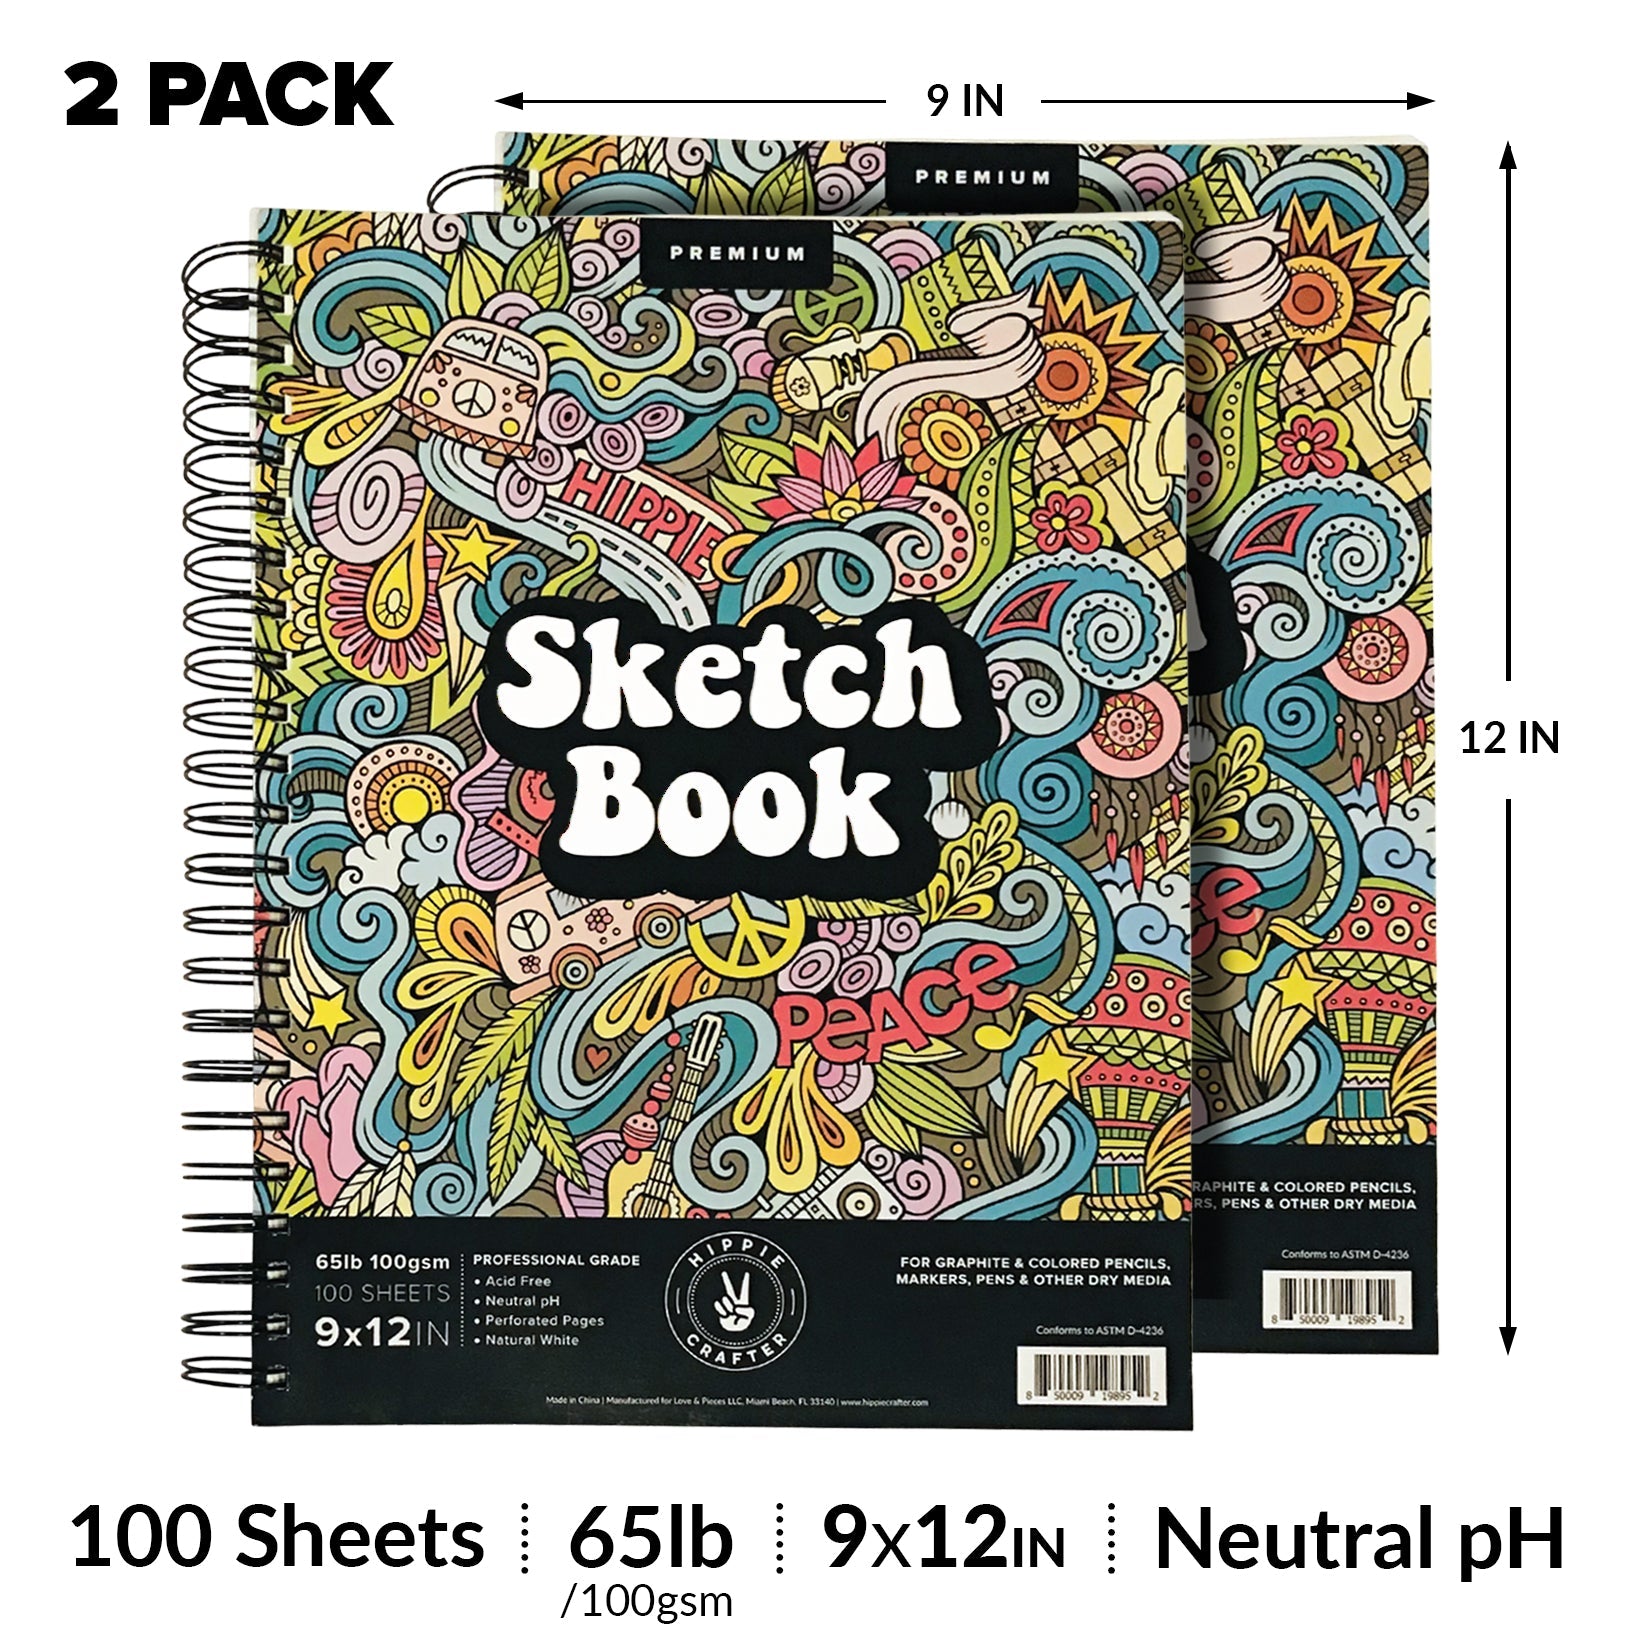 9 x 12 inches Hardcover Sketchbook for Drawing 120 Sheets Spiral Bound  Sketch Pad Premium Art Sketchbook Artistic Drawing Painting Writing